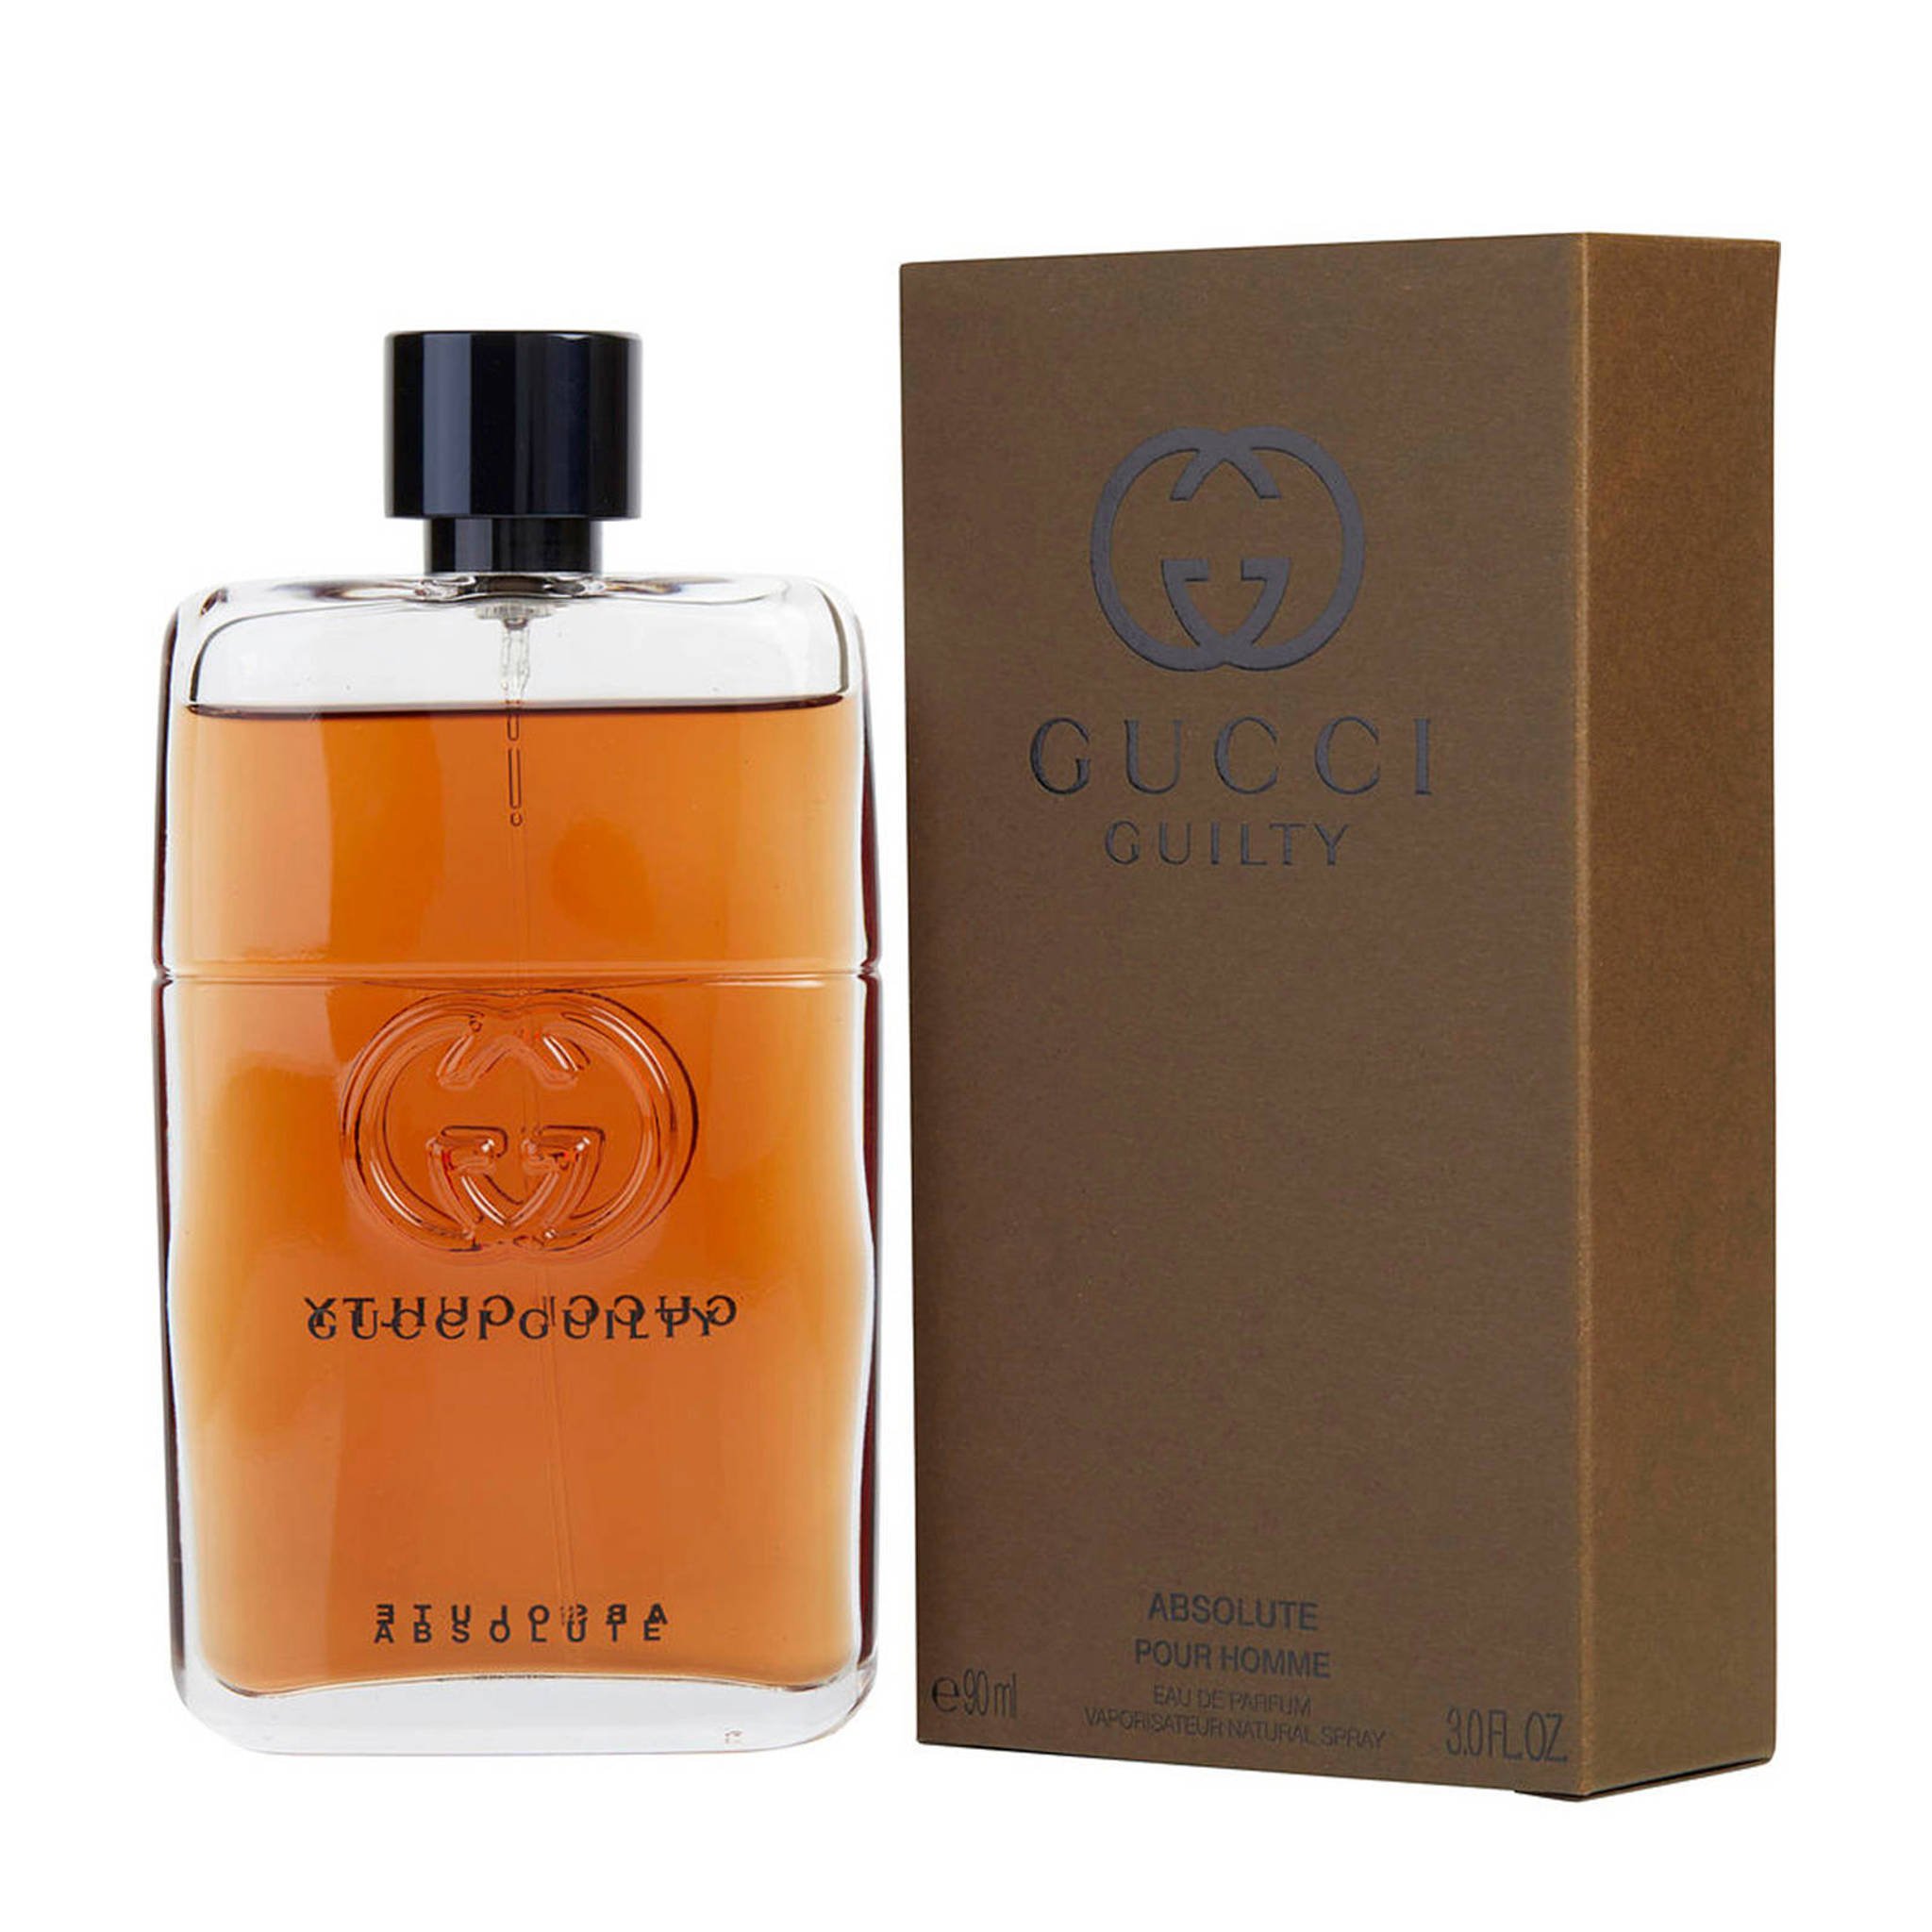 Guilty Absolute Pour Homme - Gucci - 90 ml - edp